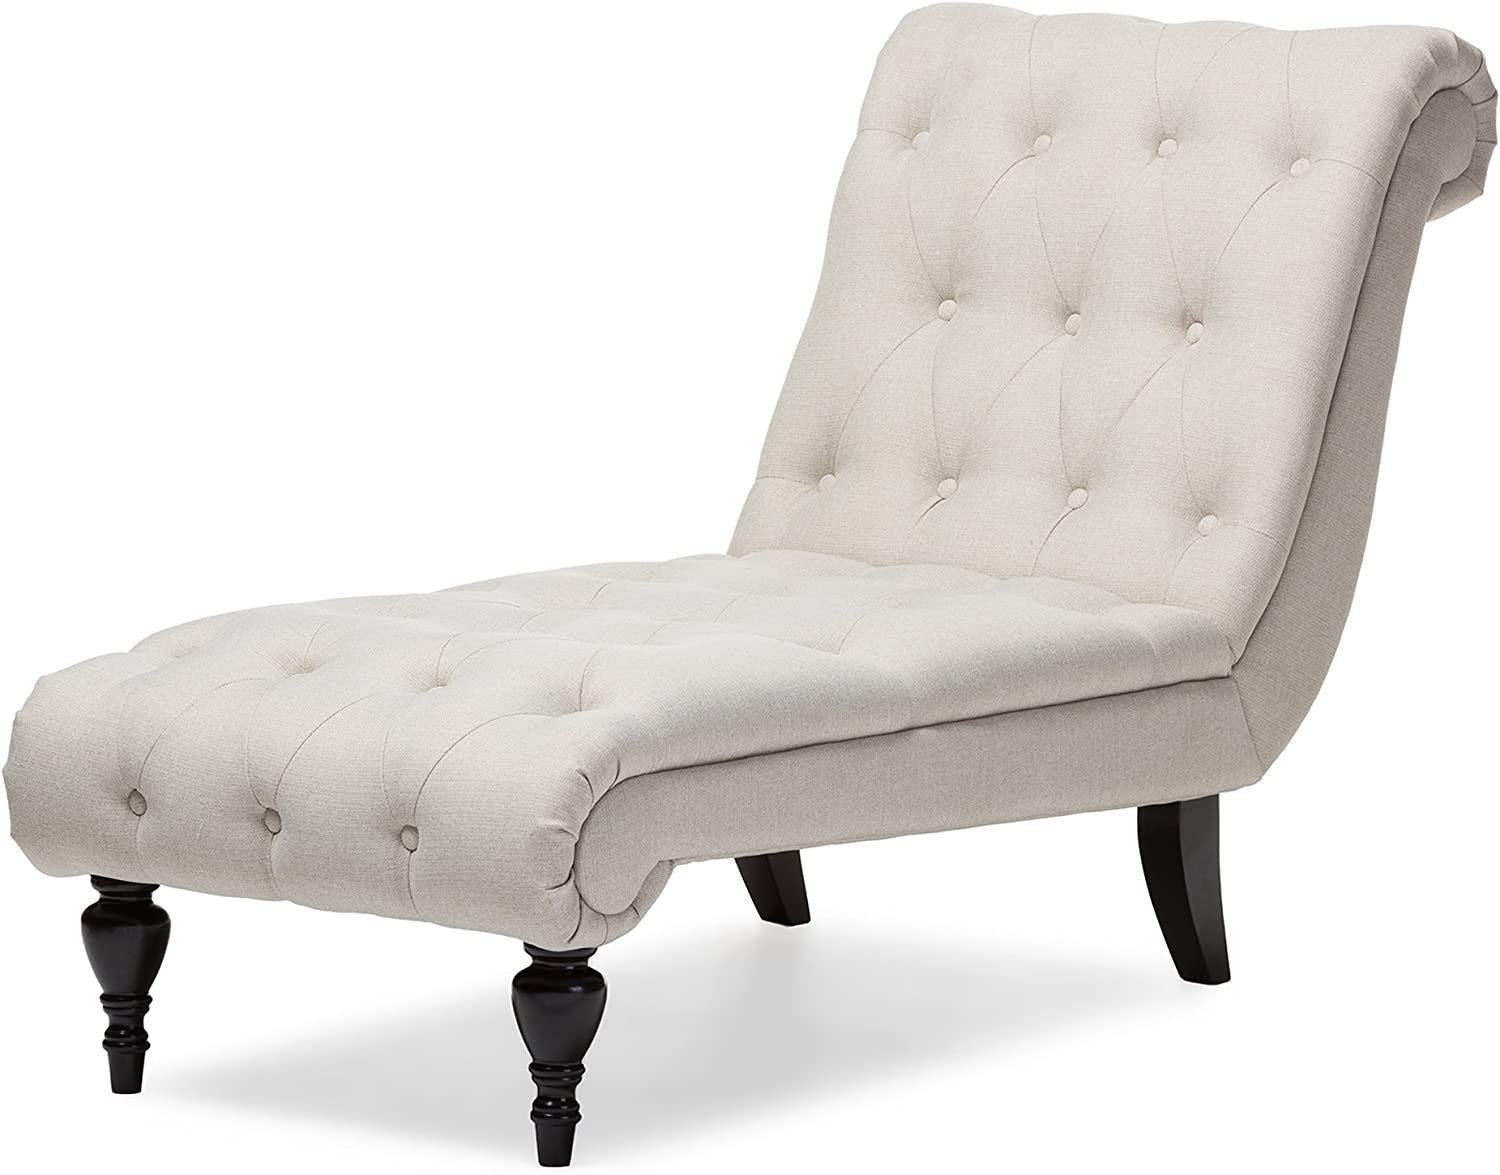 Baxton Studio Layla Mid-century Modern Light Beige Fabric Upholstered Button-tufted Chaise Lounge, cream